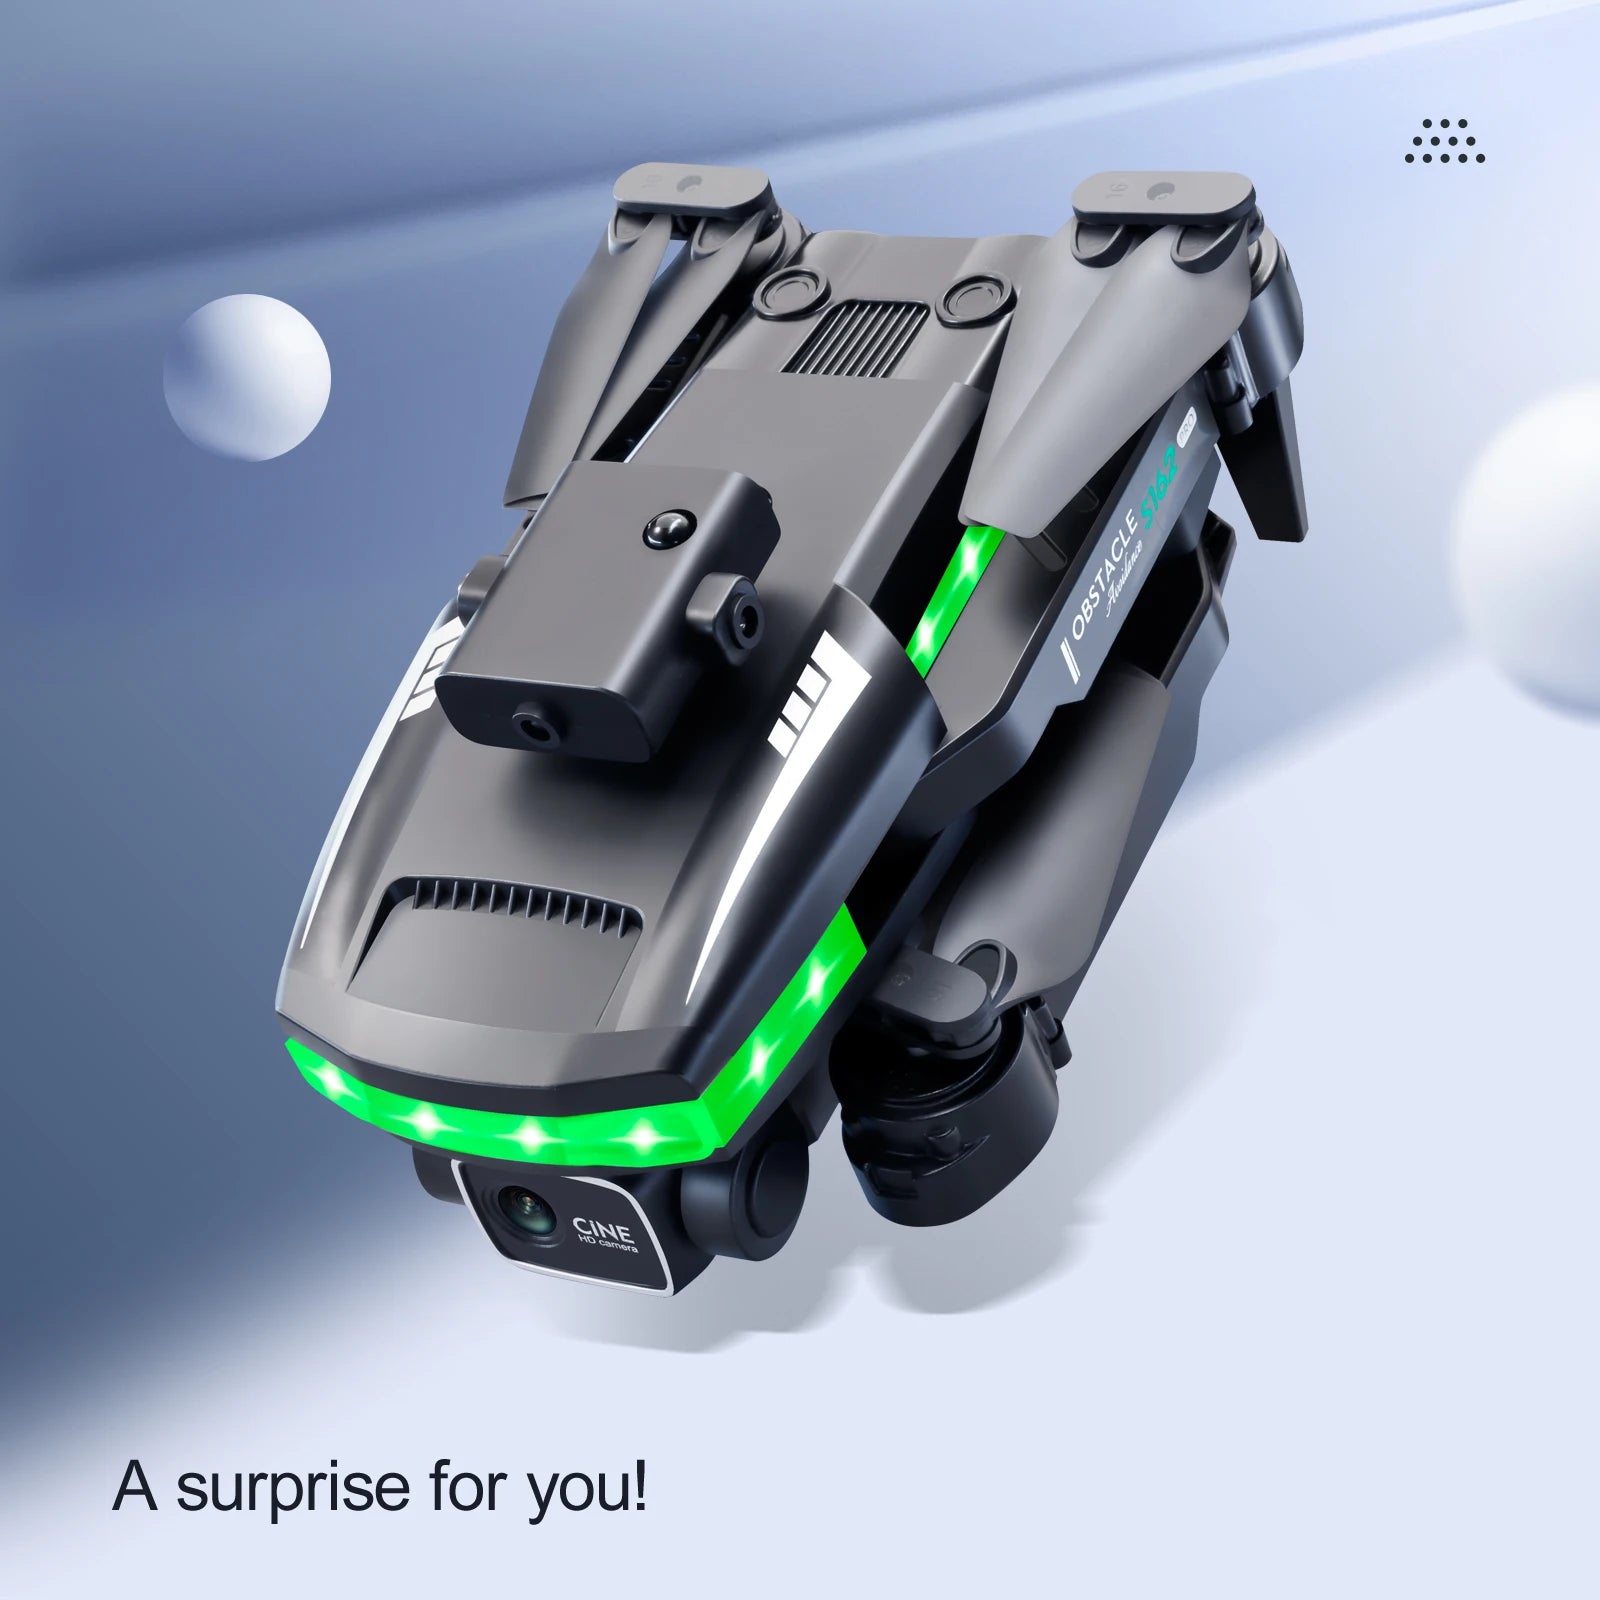 S162 Pro Drone, four arms can be folded, small size, easy to carry.